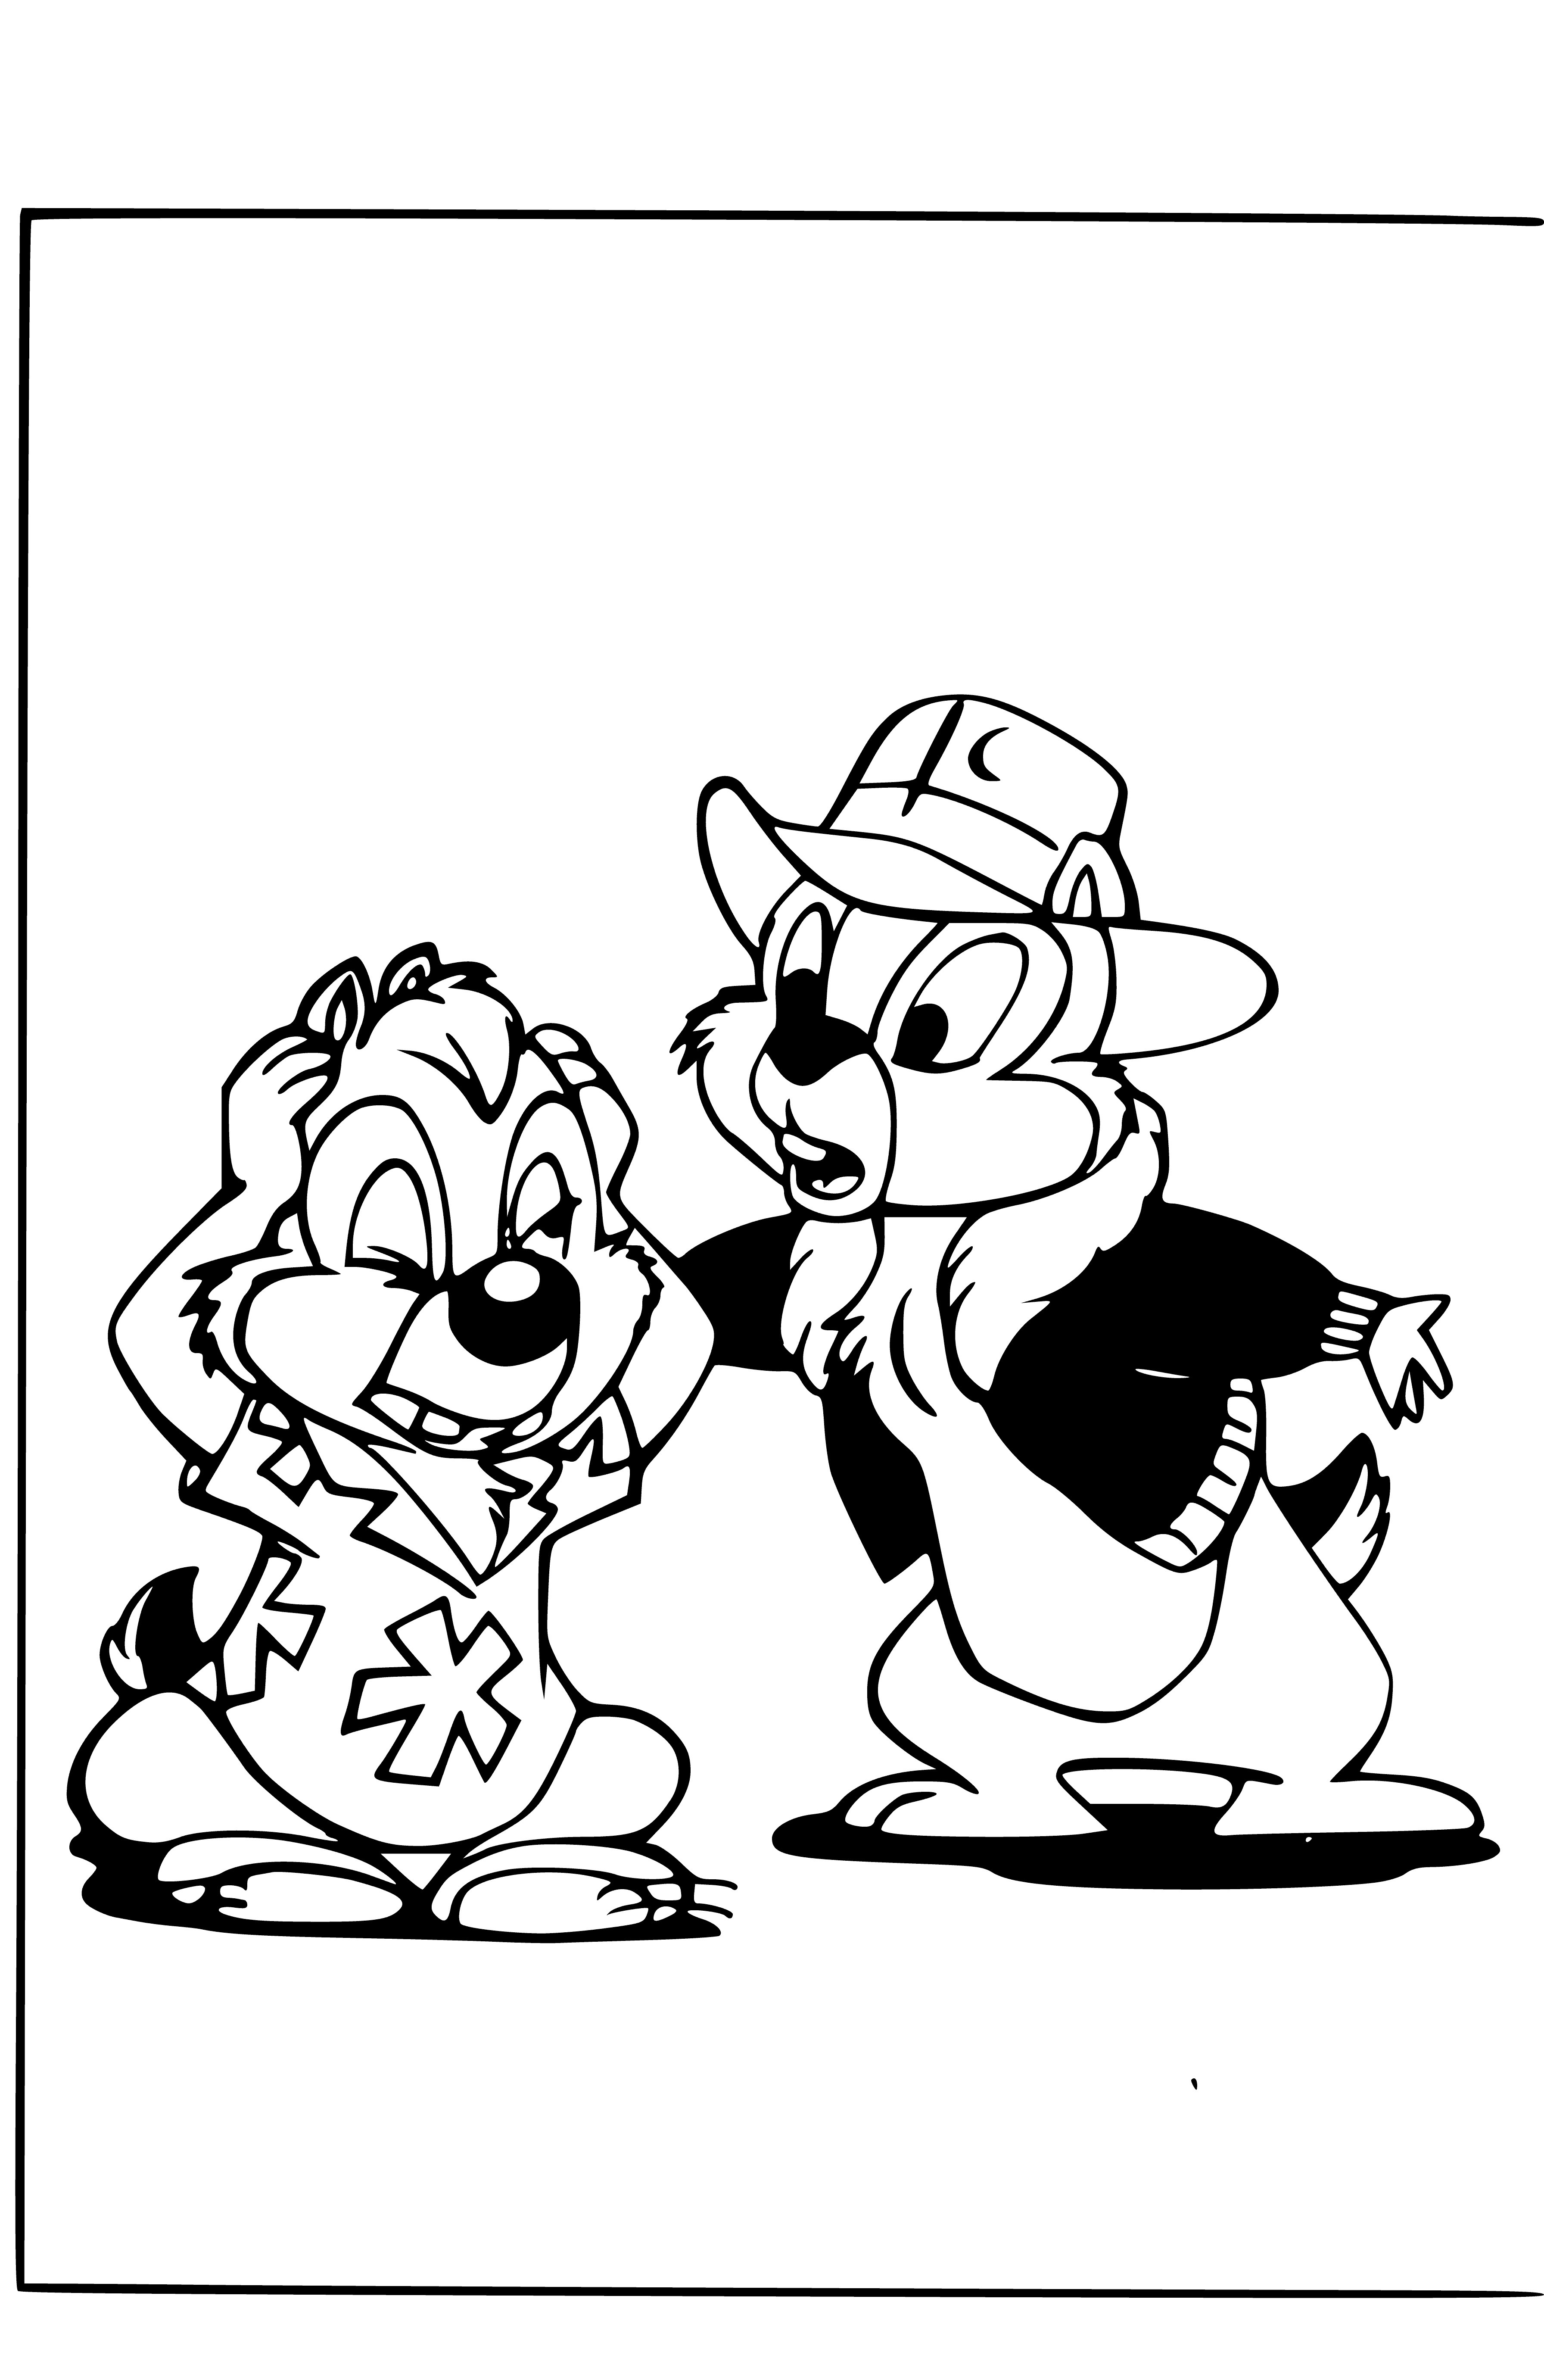 Chip and dale coloring page